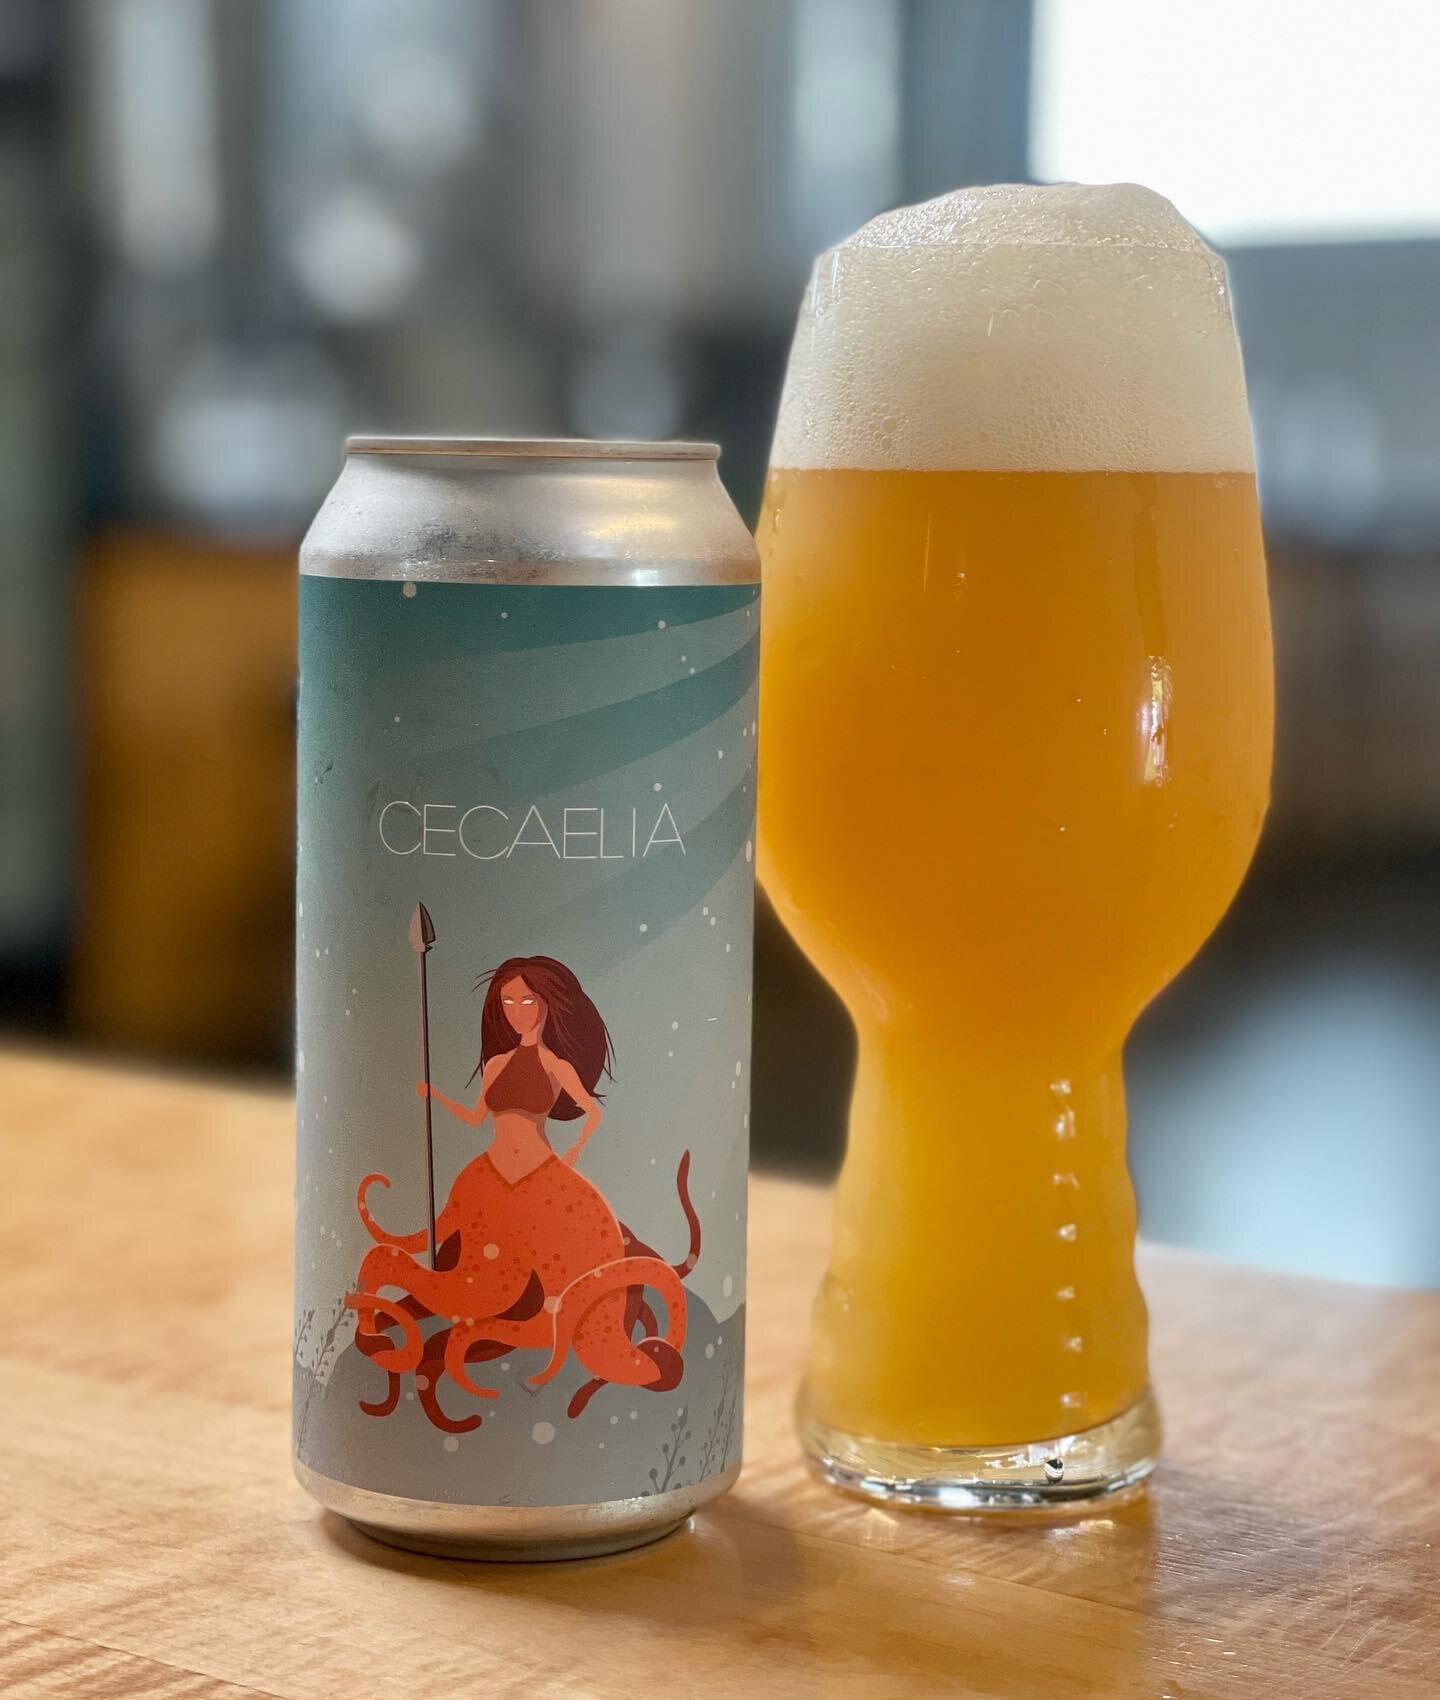 New beer release today! We are open at 4
Cecaelia HDHC Hazy IPA 6.5%
.
What in the H is HDHC??? Some whacky new term for using a whole lot of hops in different forms. High Density Hop Charge. We used Citra, Strata, Incognito Citra, and Citra Cryo to 